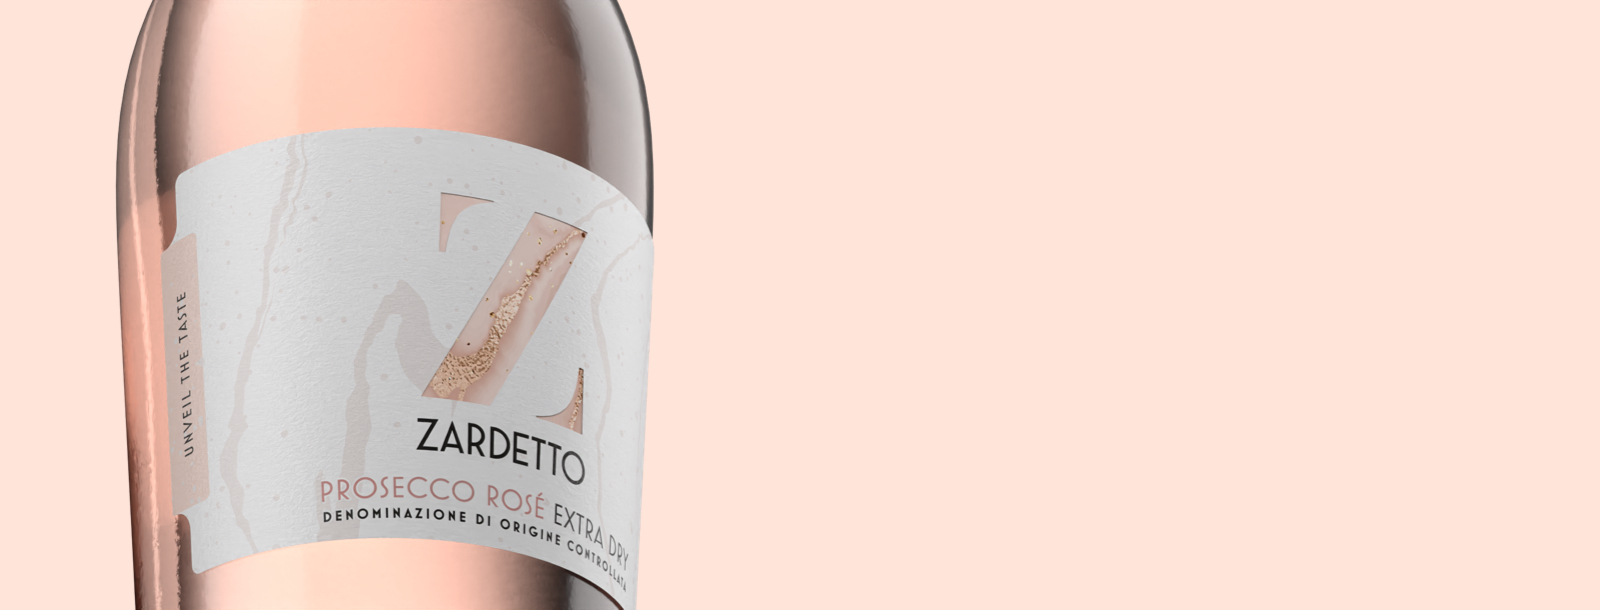 Label on the bottle of Zardetto's Prosecco Rosé Extra Dry